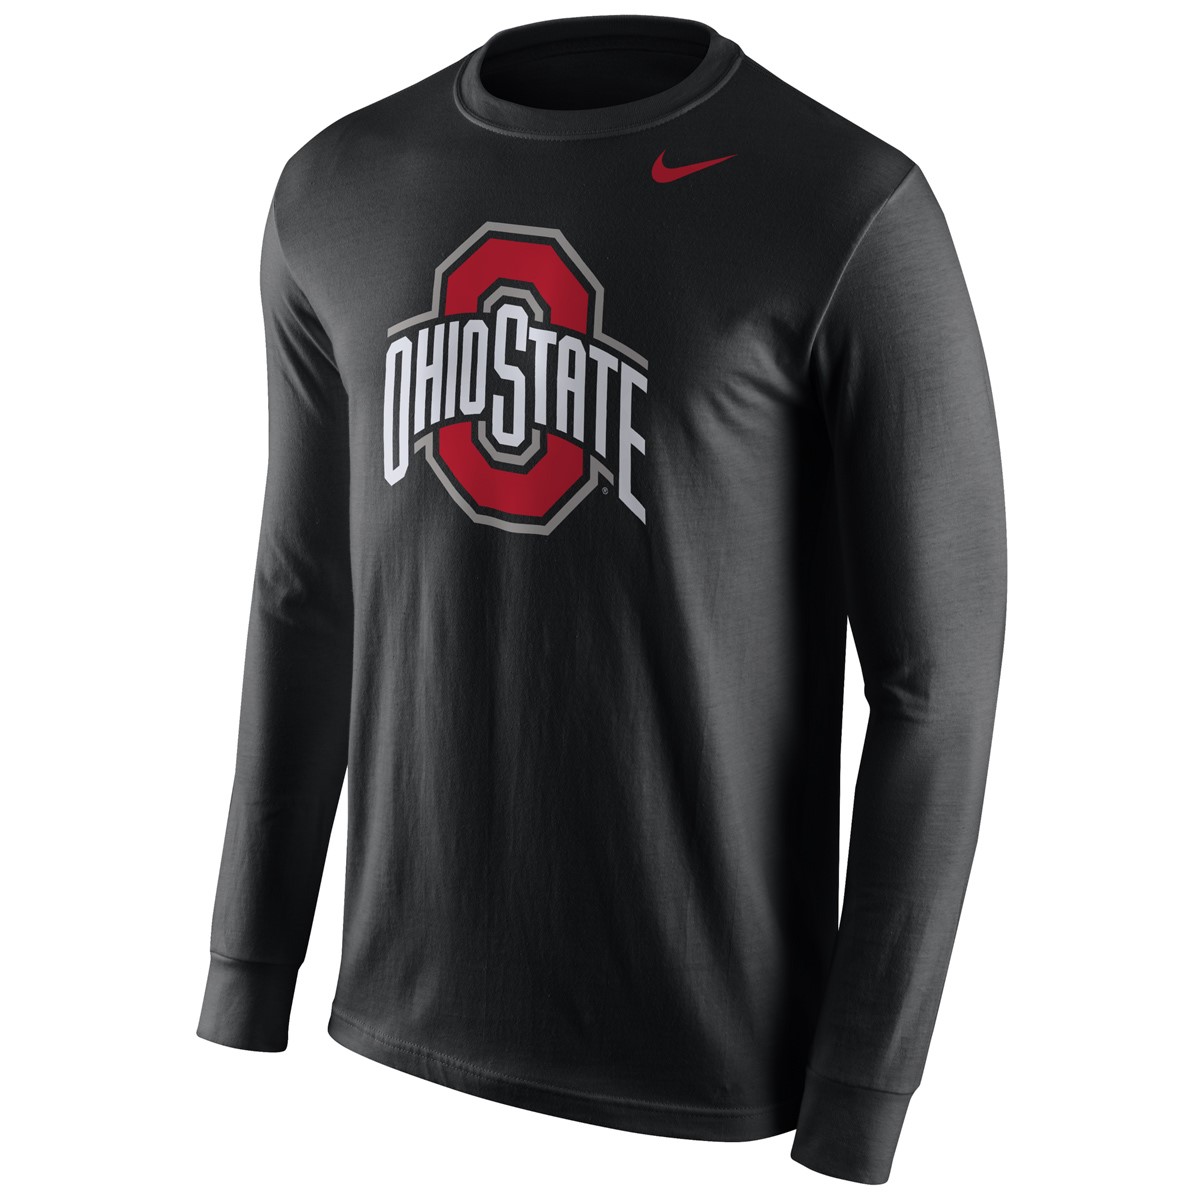 Ohio State Sportswear for him! College Traditions Columbus (614)291-4678